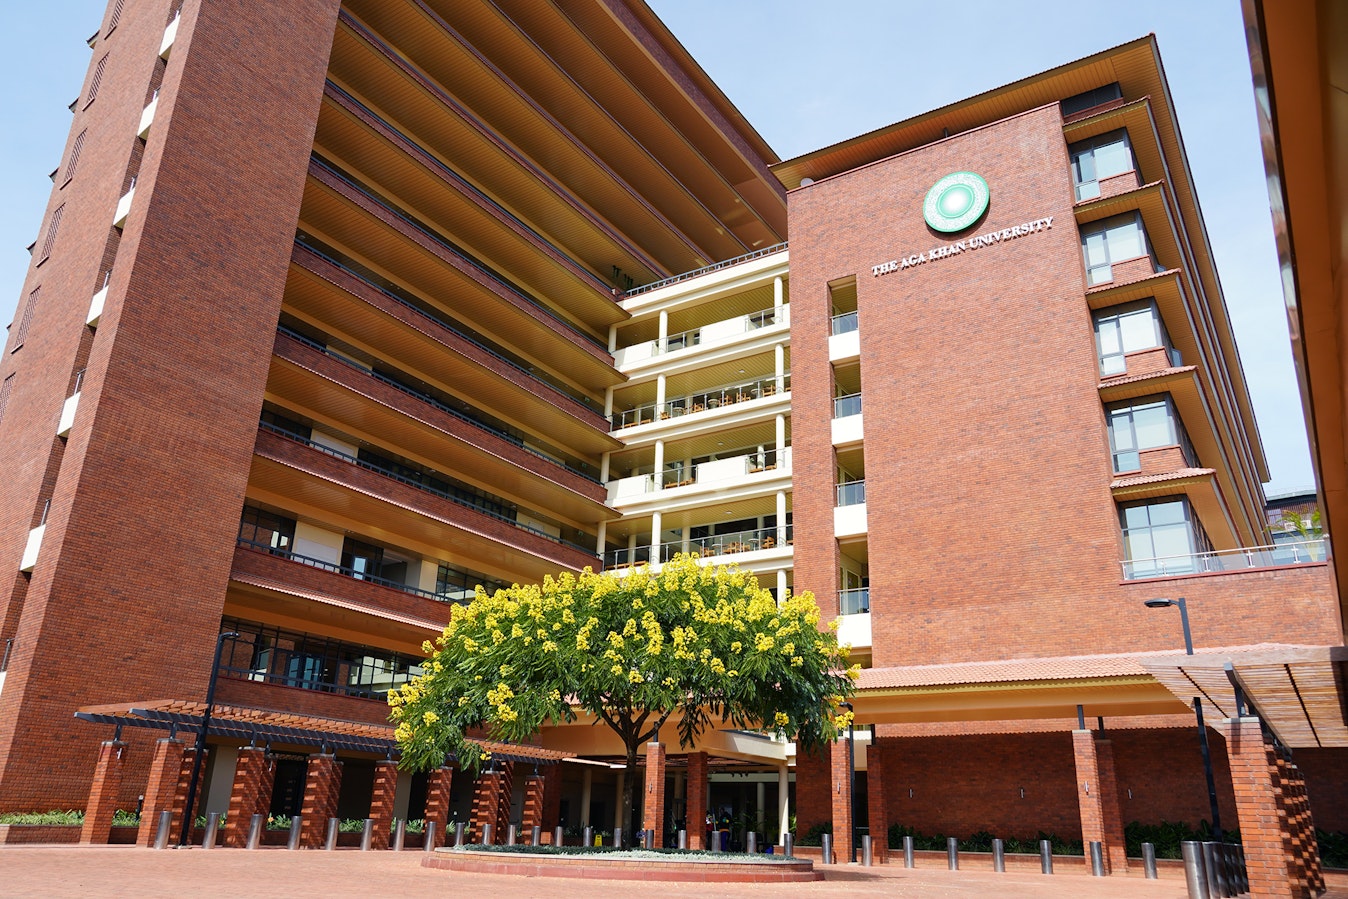 The AKU Centre in Nairobi is a model for sustainable high-rise development with unique spaces designed to nourish the learning experience.